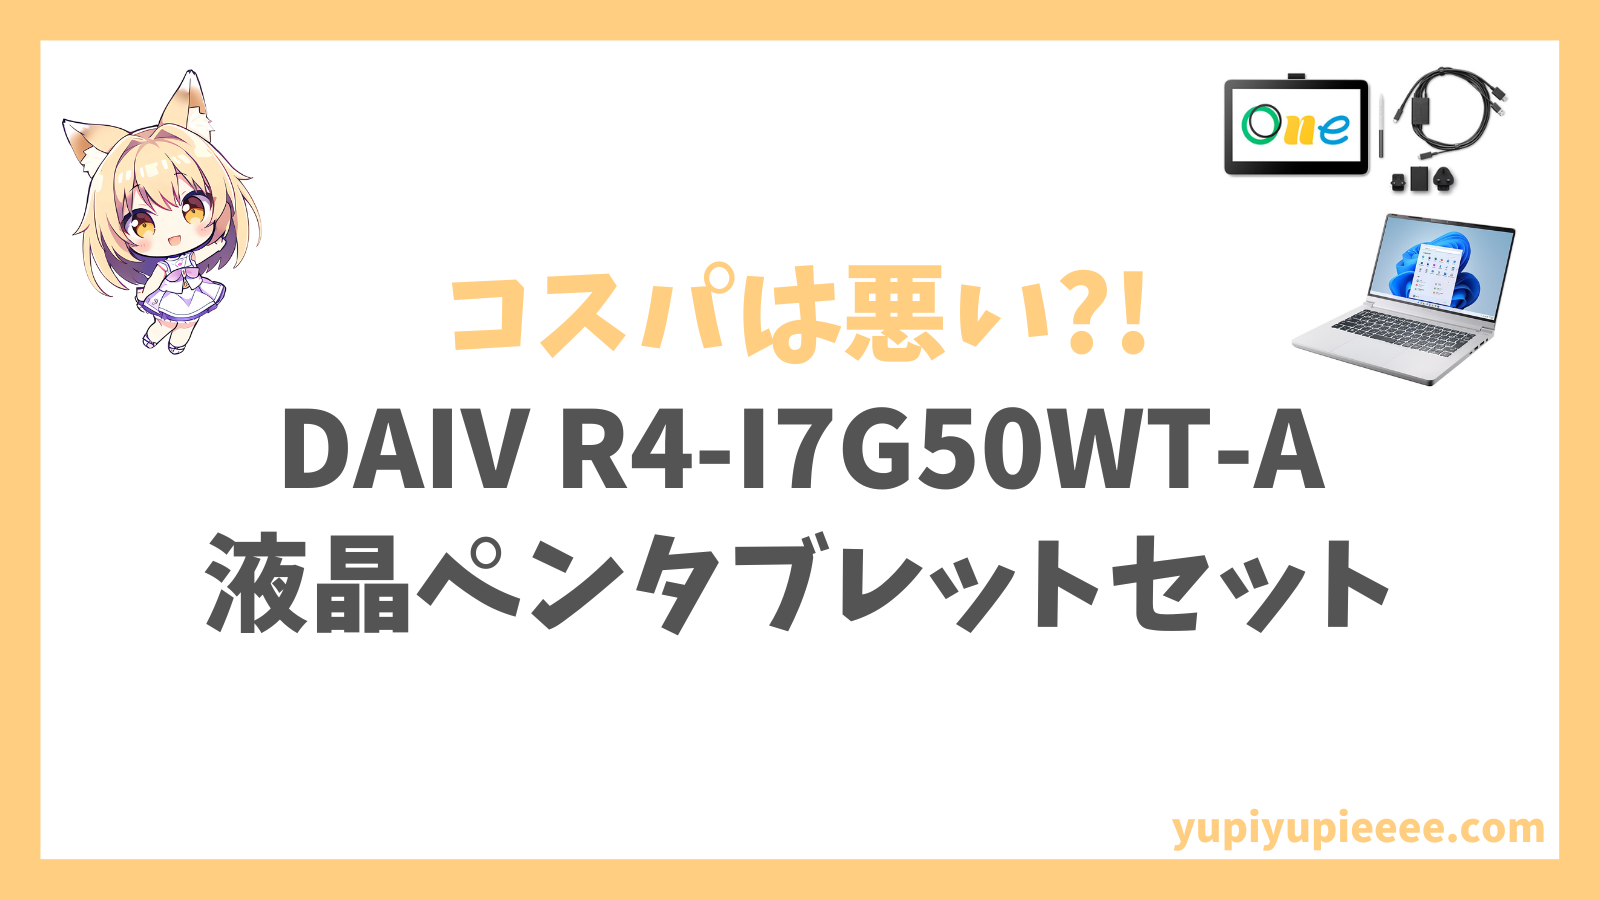 DAIV R4-I7G50WT-A（液晶ペンタブレットセット）